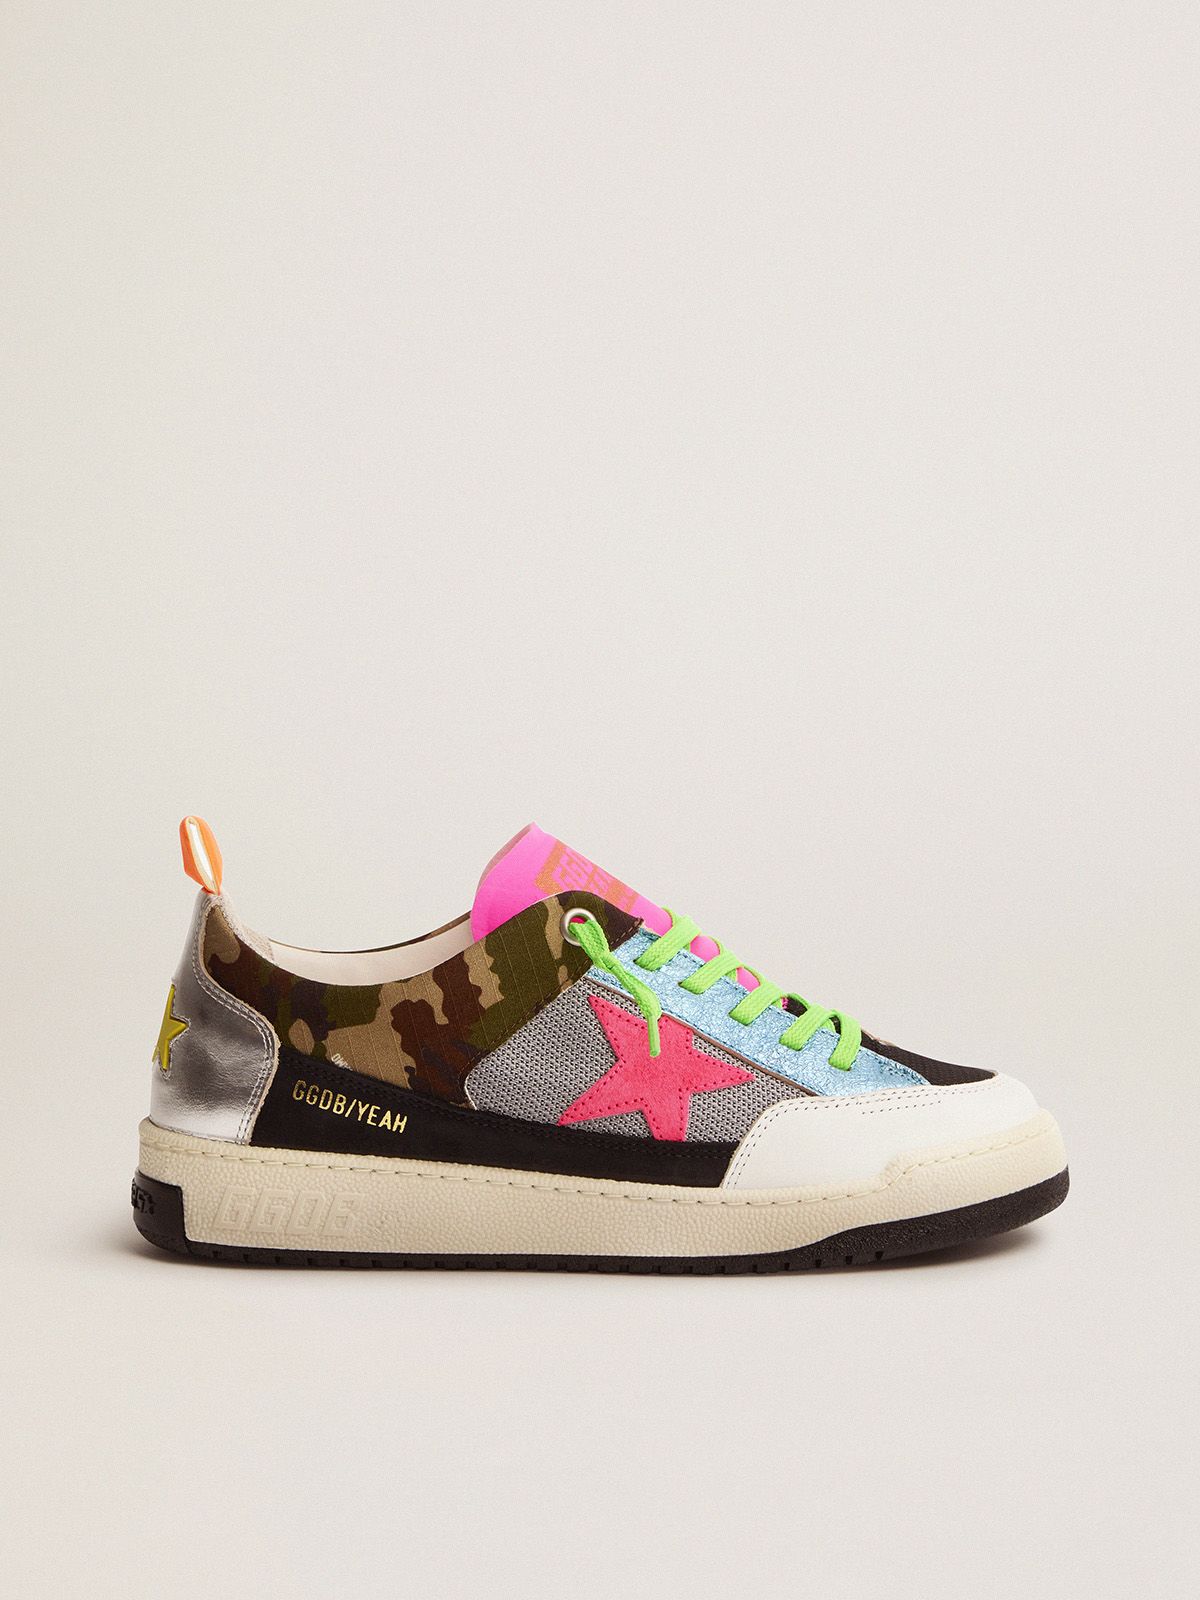 golden goose sneakers Women’s camouflage star with fuchsia Yeah